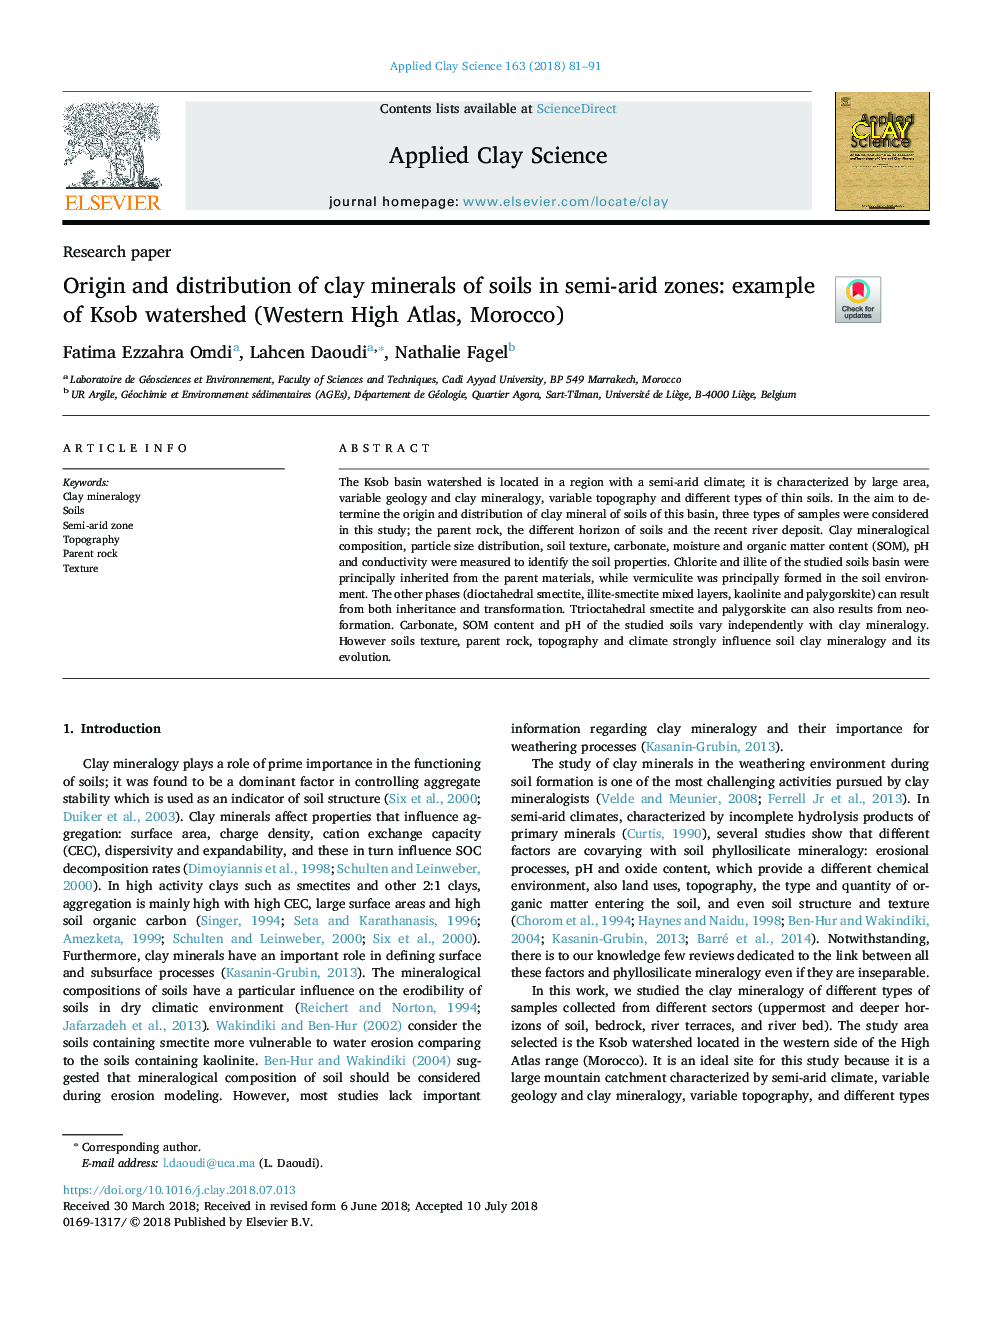 Origin and distribution of clay minerals of soils in semi-arid zones: example of Ksob watershed (Western High Atlas, Morocco)